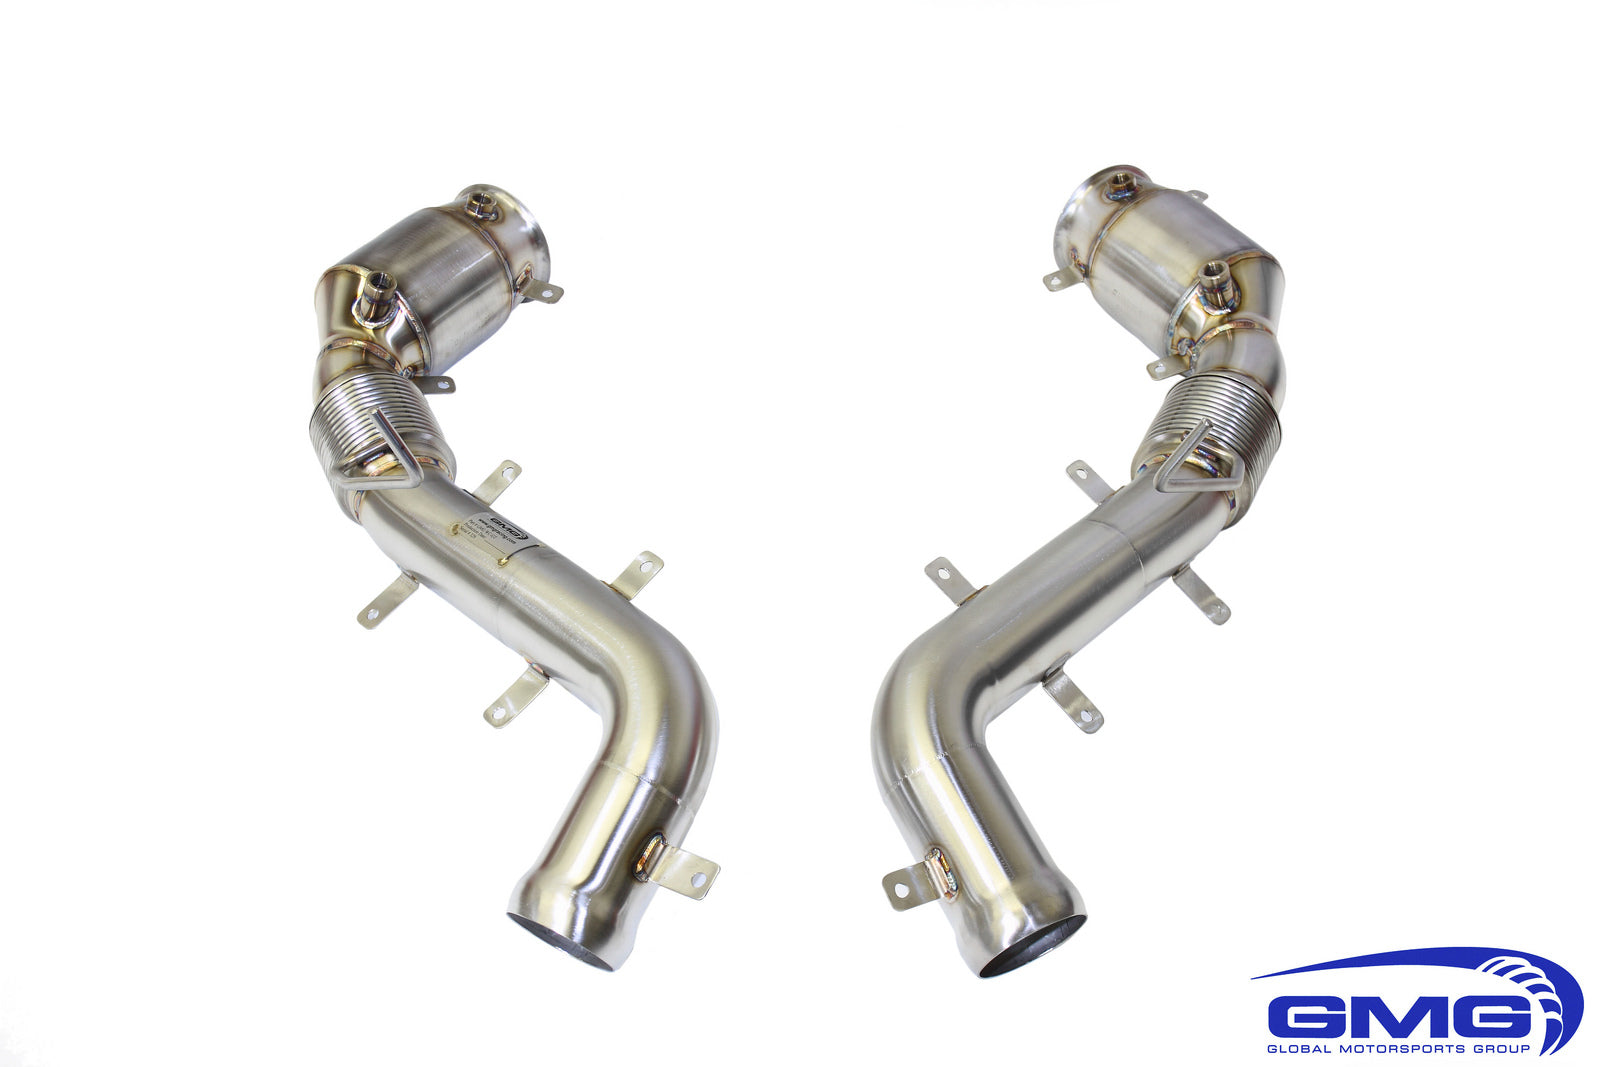 MP4-12C GMG WC-GT Down Pipe System